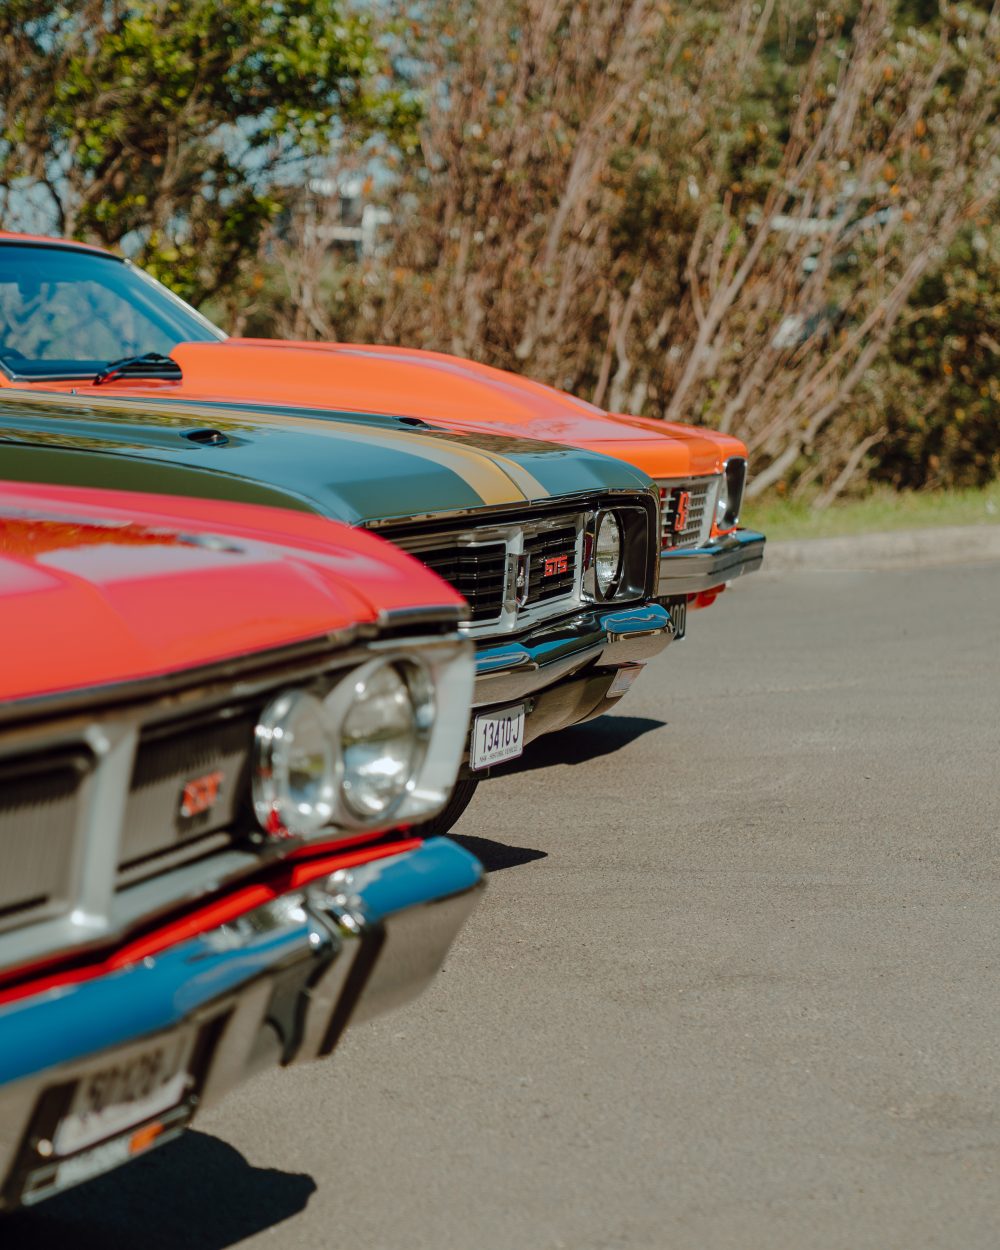 From front: red 1970 Ford Falcon XY GT, green 1969 Holden Monaro GTS Coupe, orange 1976 Holden Torana